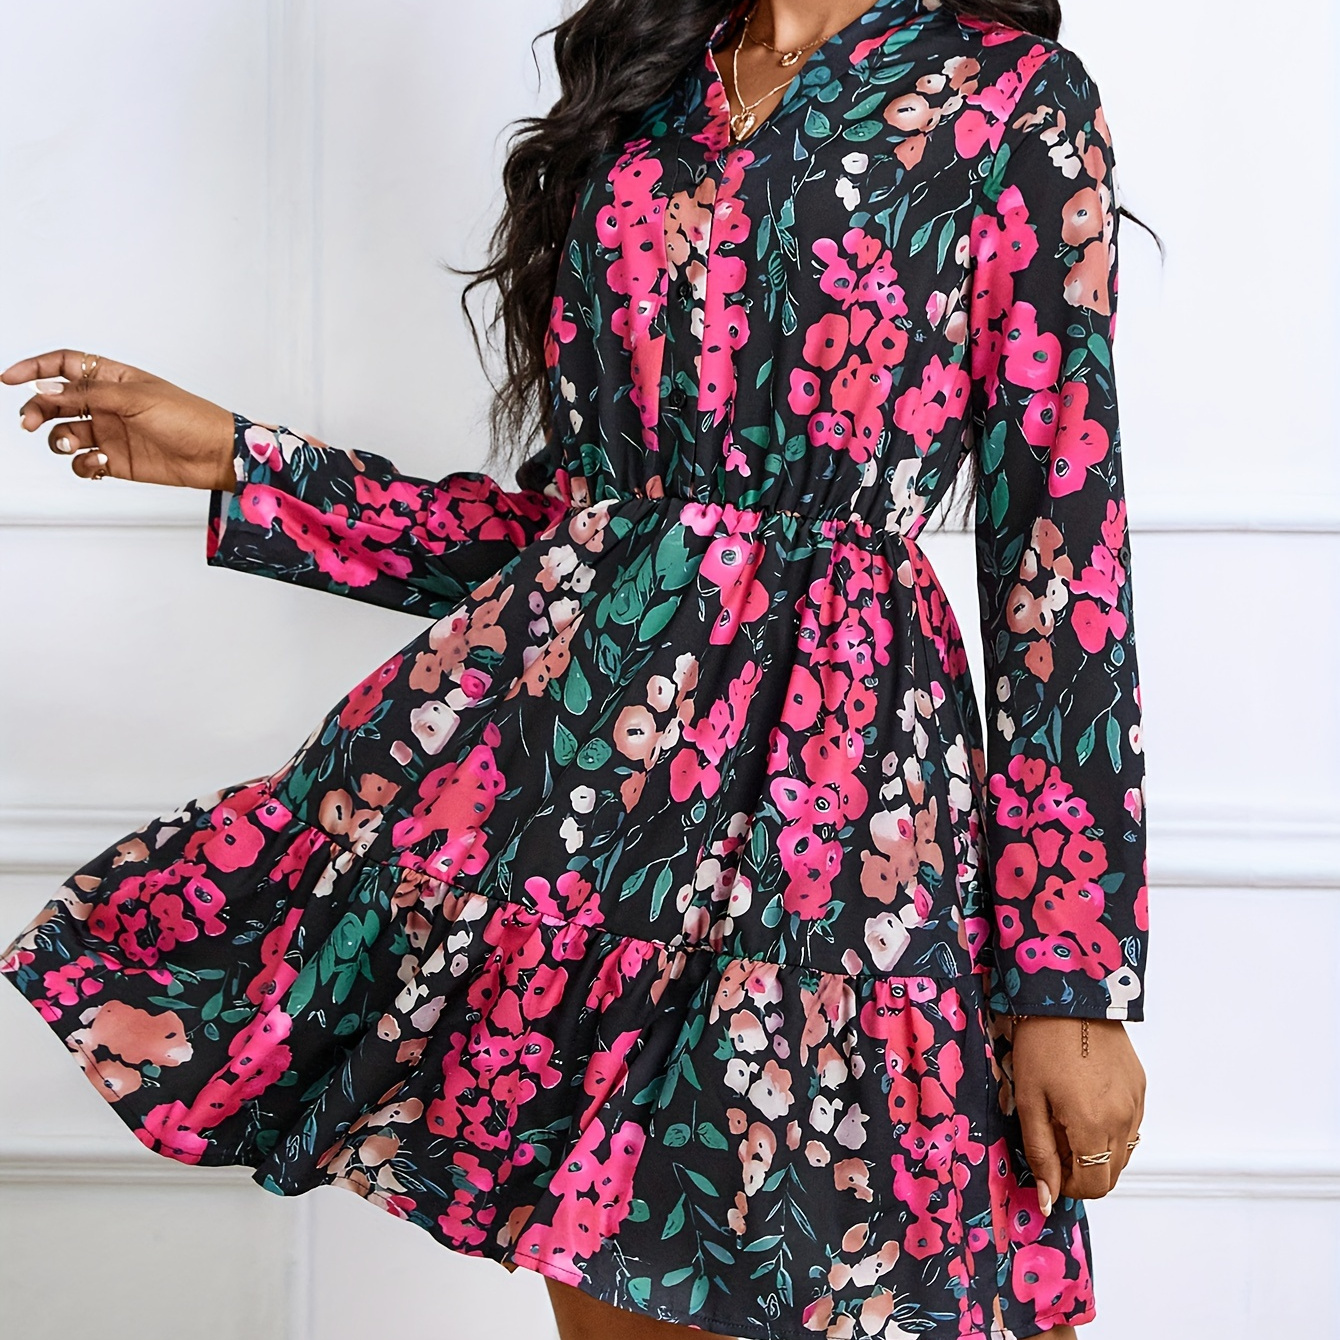 

Floral Print Cinched Waist Dress, Casual V Neck Long Sleeve Dress, Women's Clothing